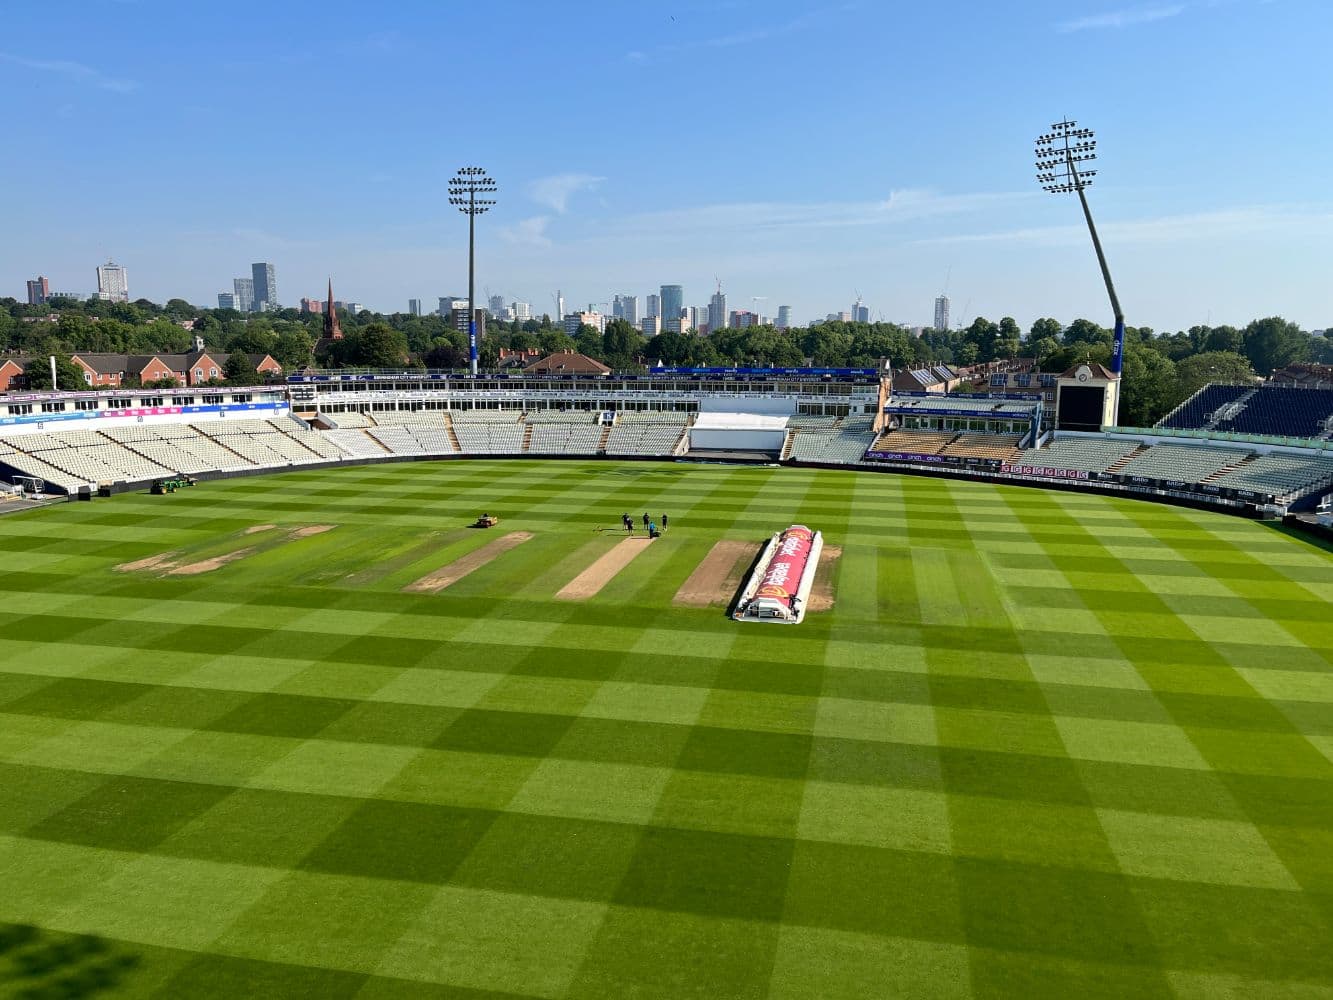 [Watch] Edgbaston Ready For Ashes Opener, Likely to Offer Batting Friendly Surface